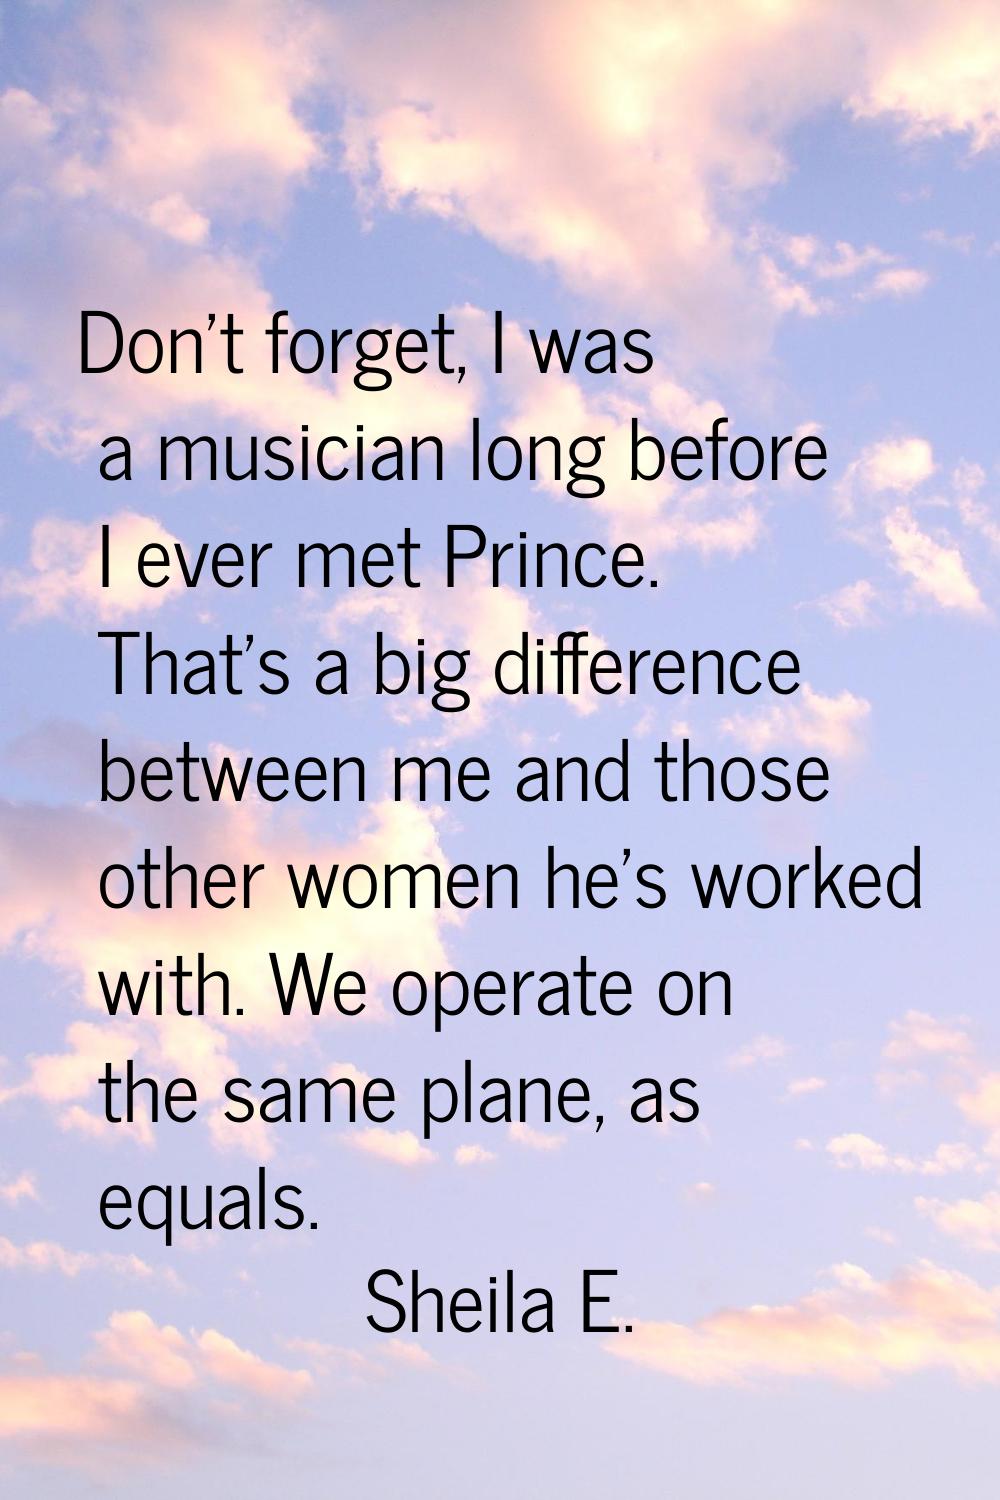 Don't forget, I was a musician long before I ever met Prince. That's a big difference between me an